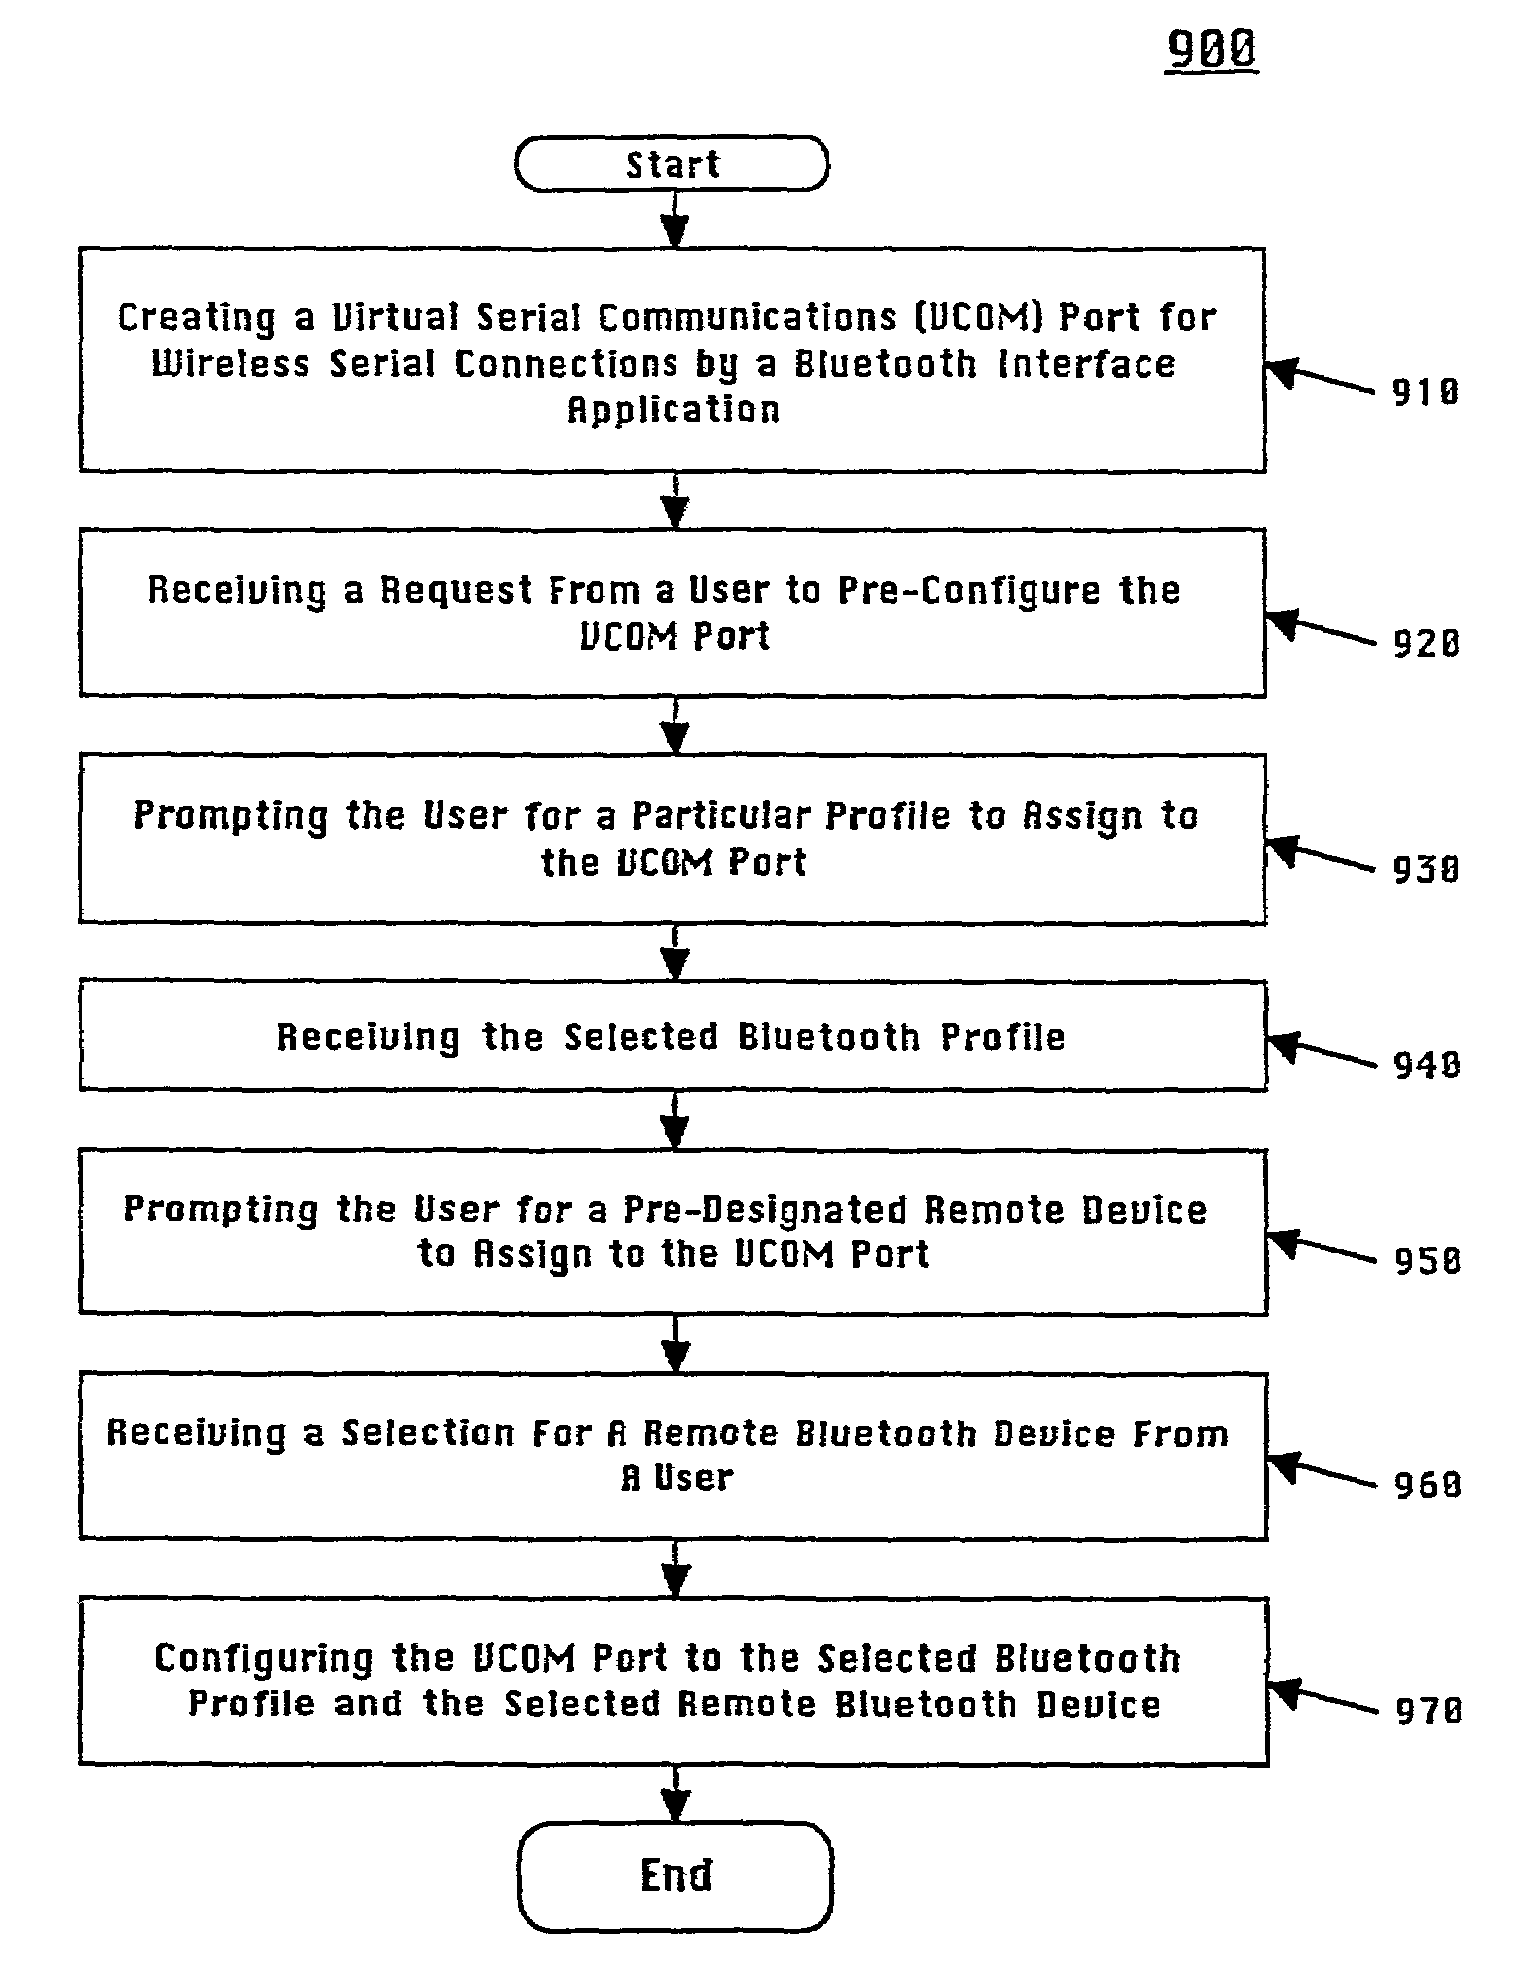 Method and apparatus for opening a virtual serial communications port for establishing a wireless connection in a Bluetooth communications network